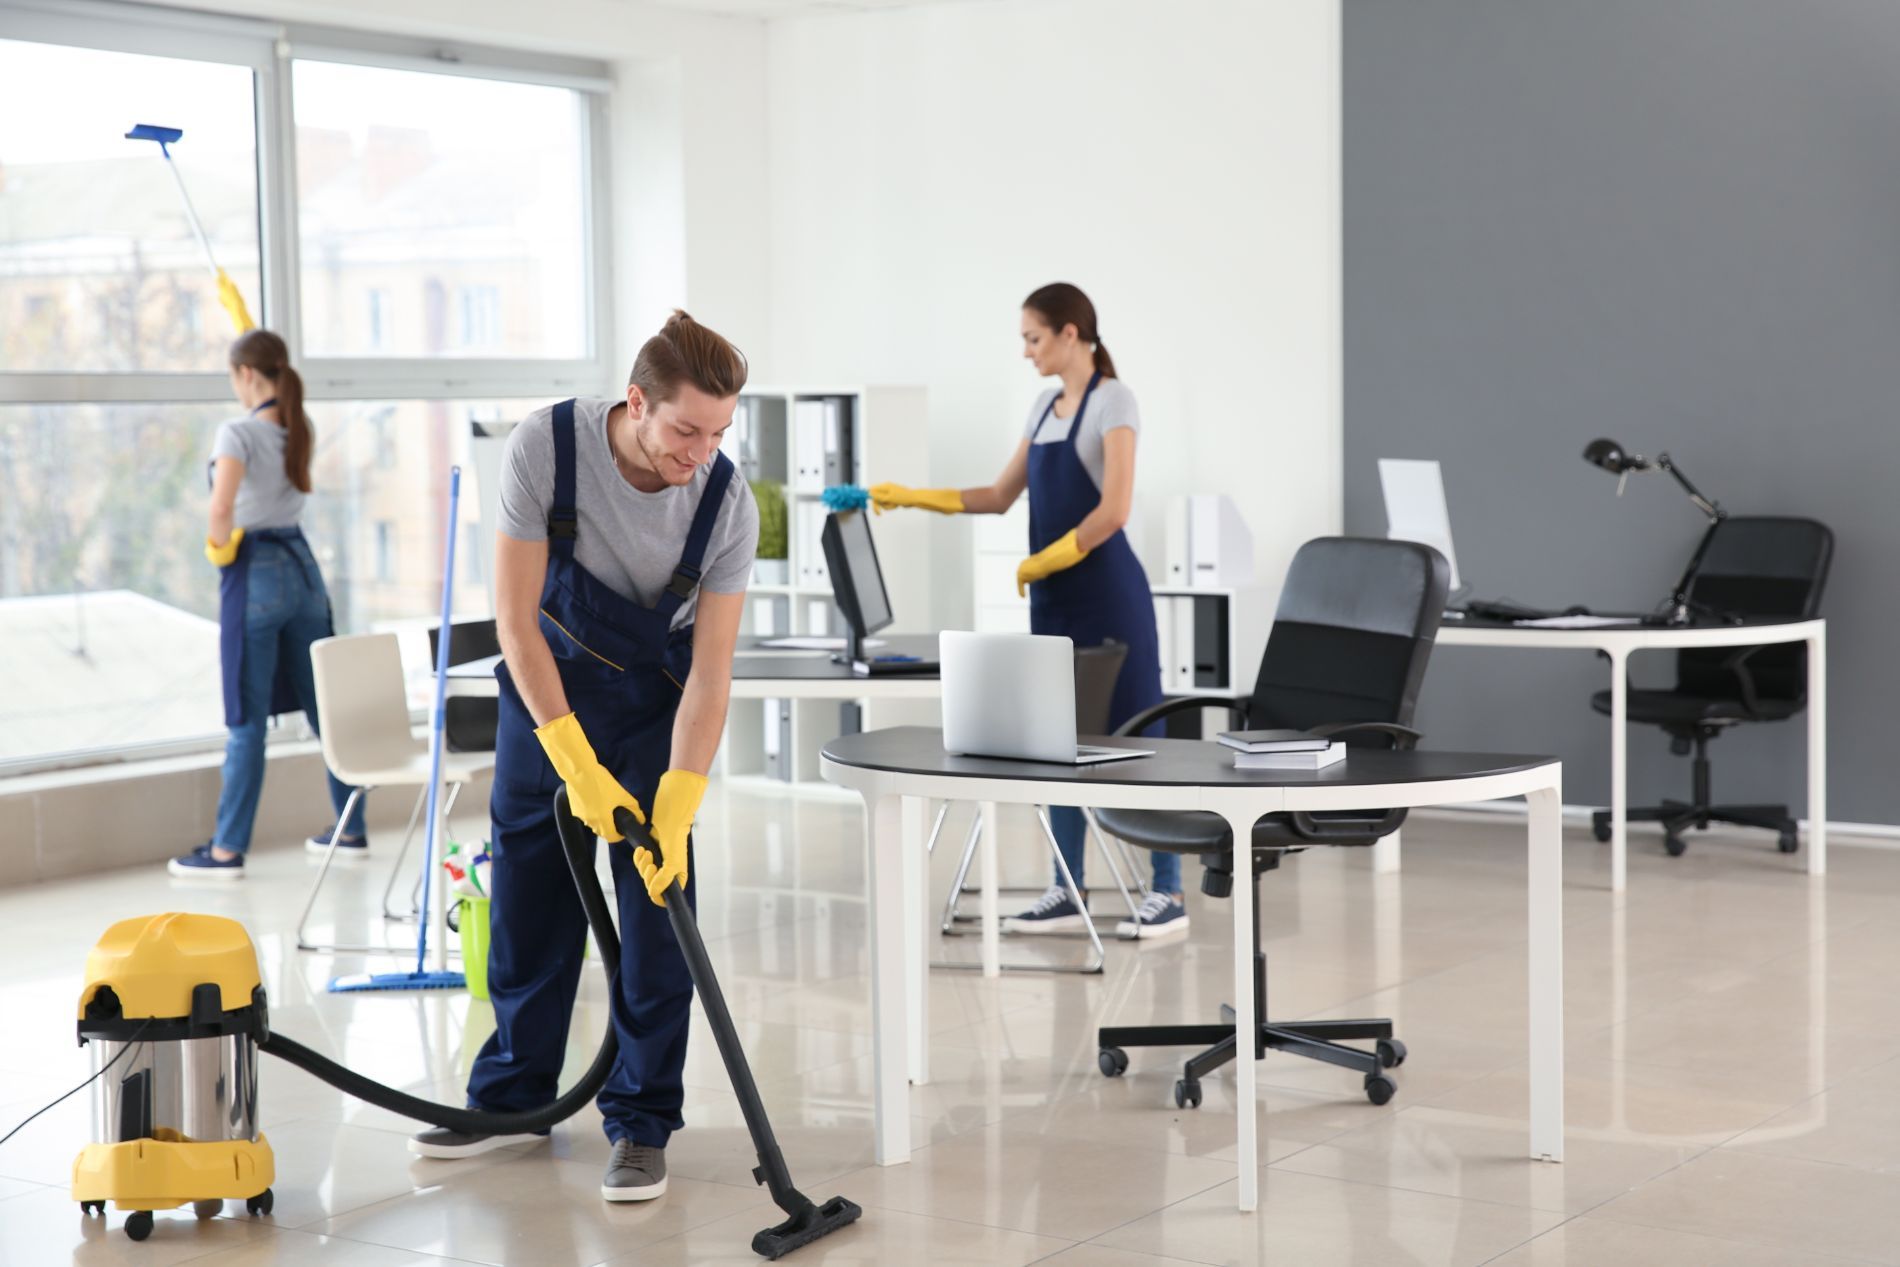 Cleaning an office